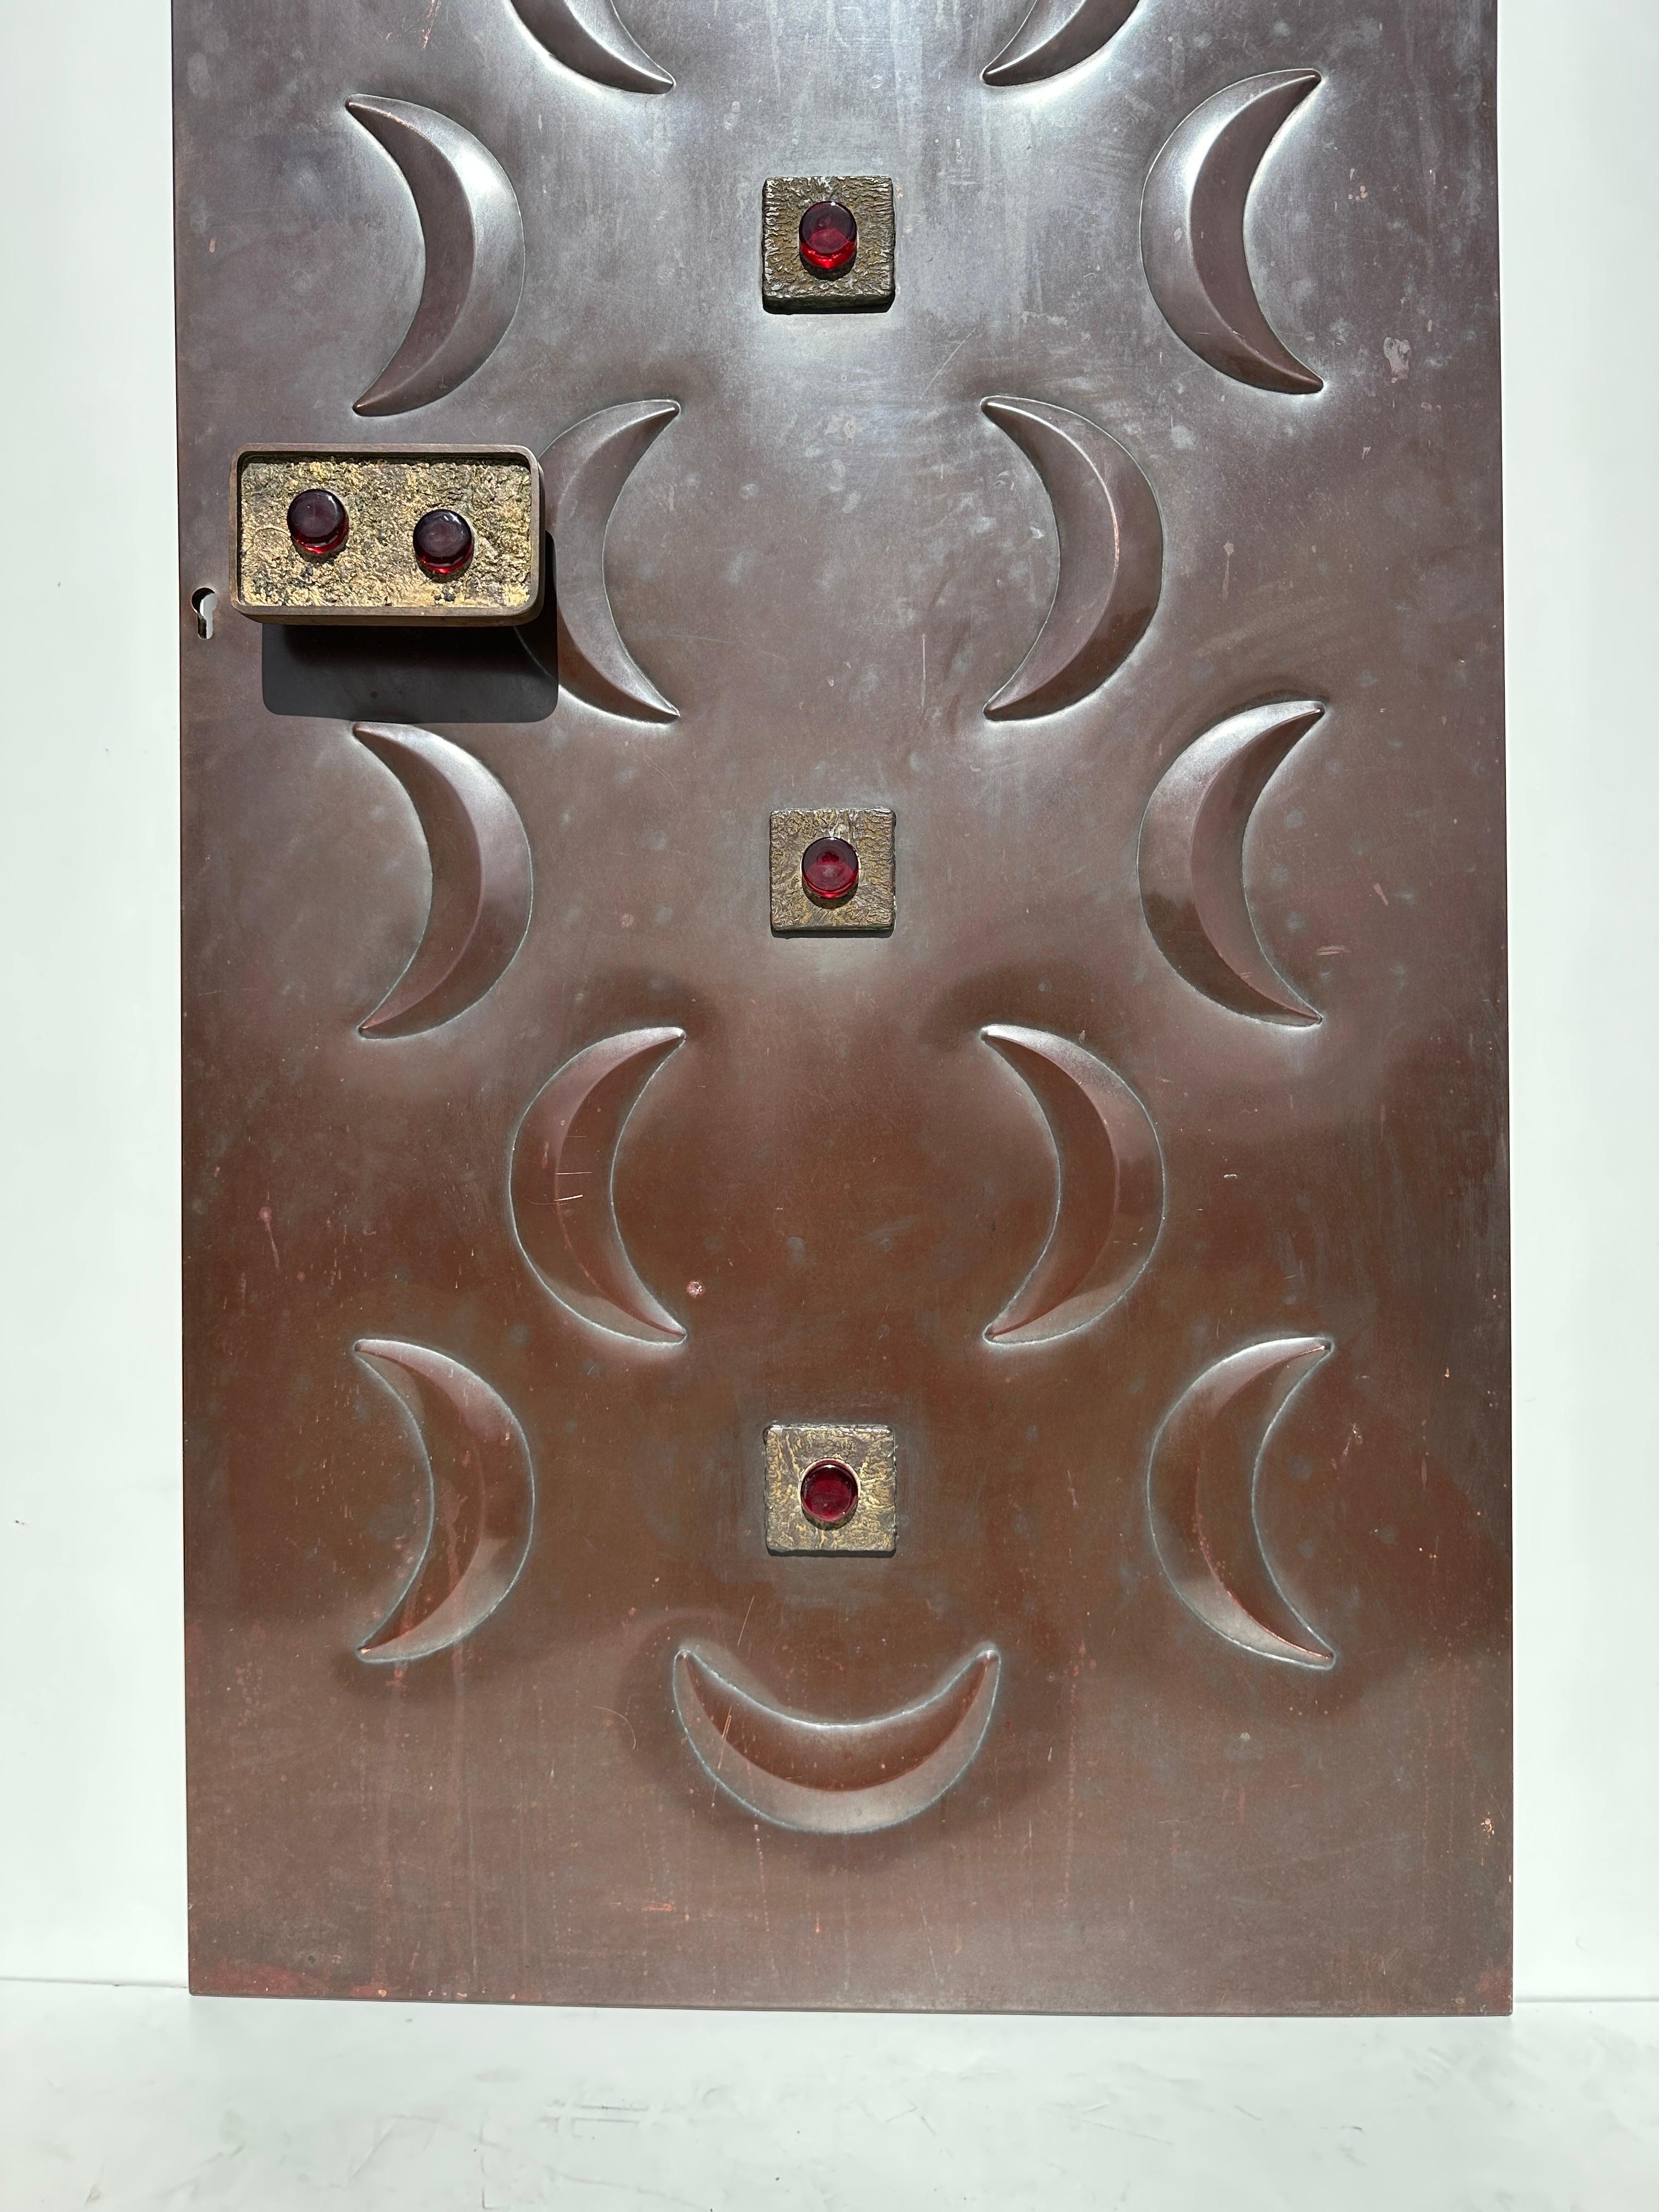 Handcrafted repousse copper door with cast bronze handle and details with cast glass ornaments. This panel can be attached to your existing door or have your contractor build a new door incorporating the copper panel.
Or simply use as a decorative